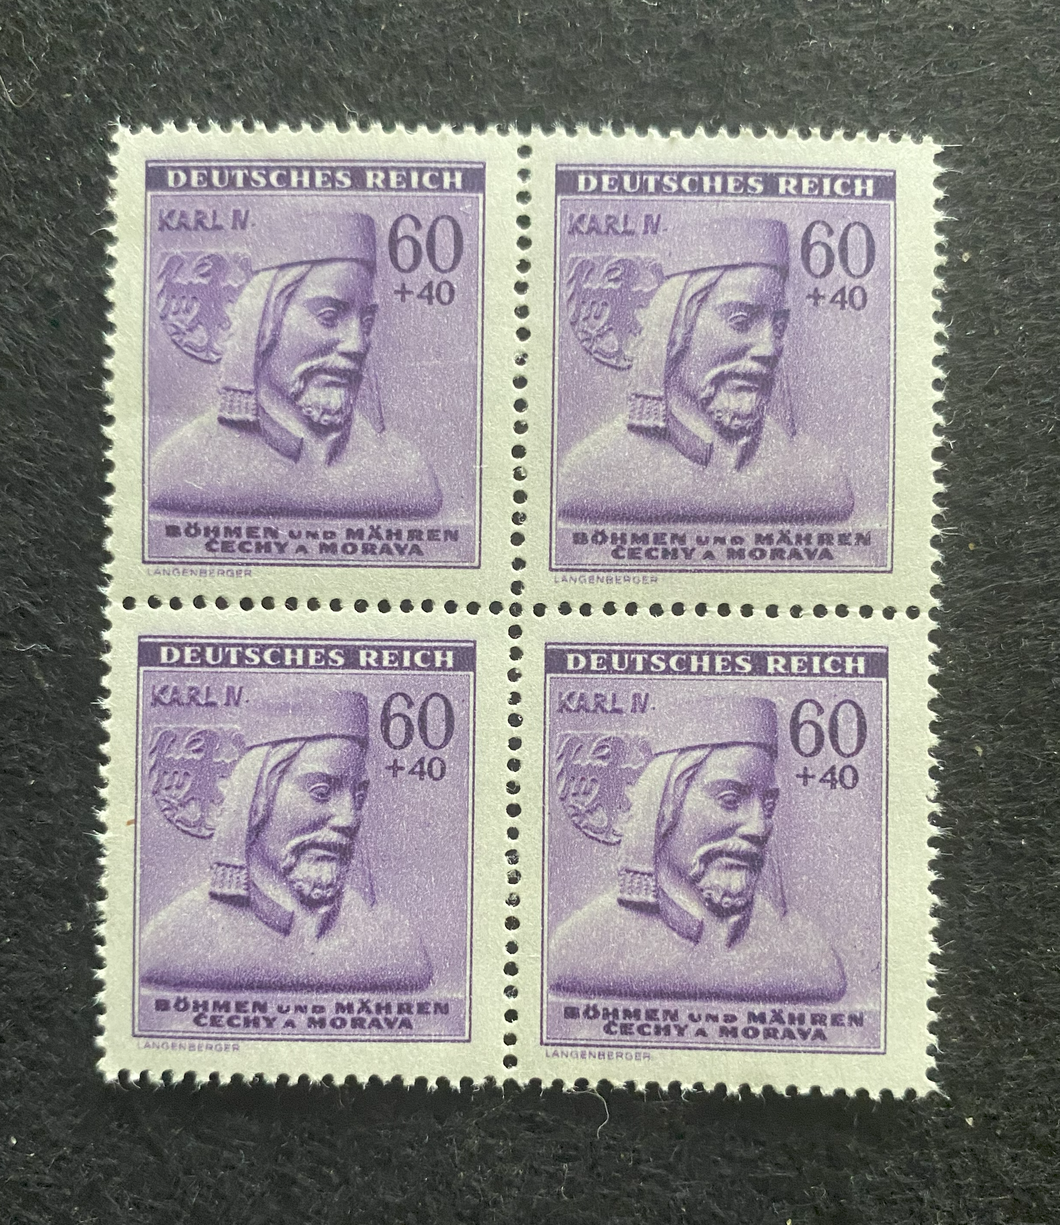 Rare Old Antique Authentic WWII Unused German Nazi Stamp MNH 60K Block Of 4